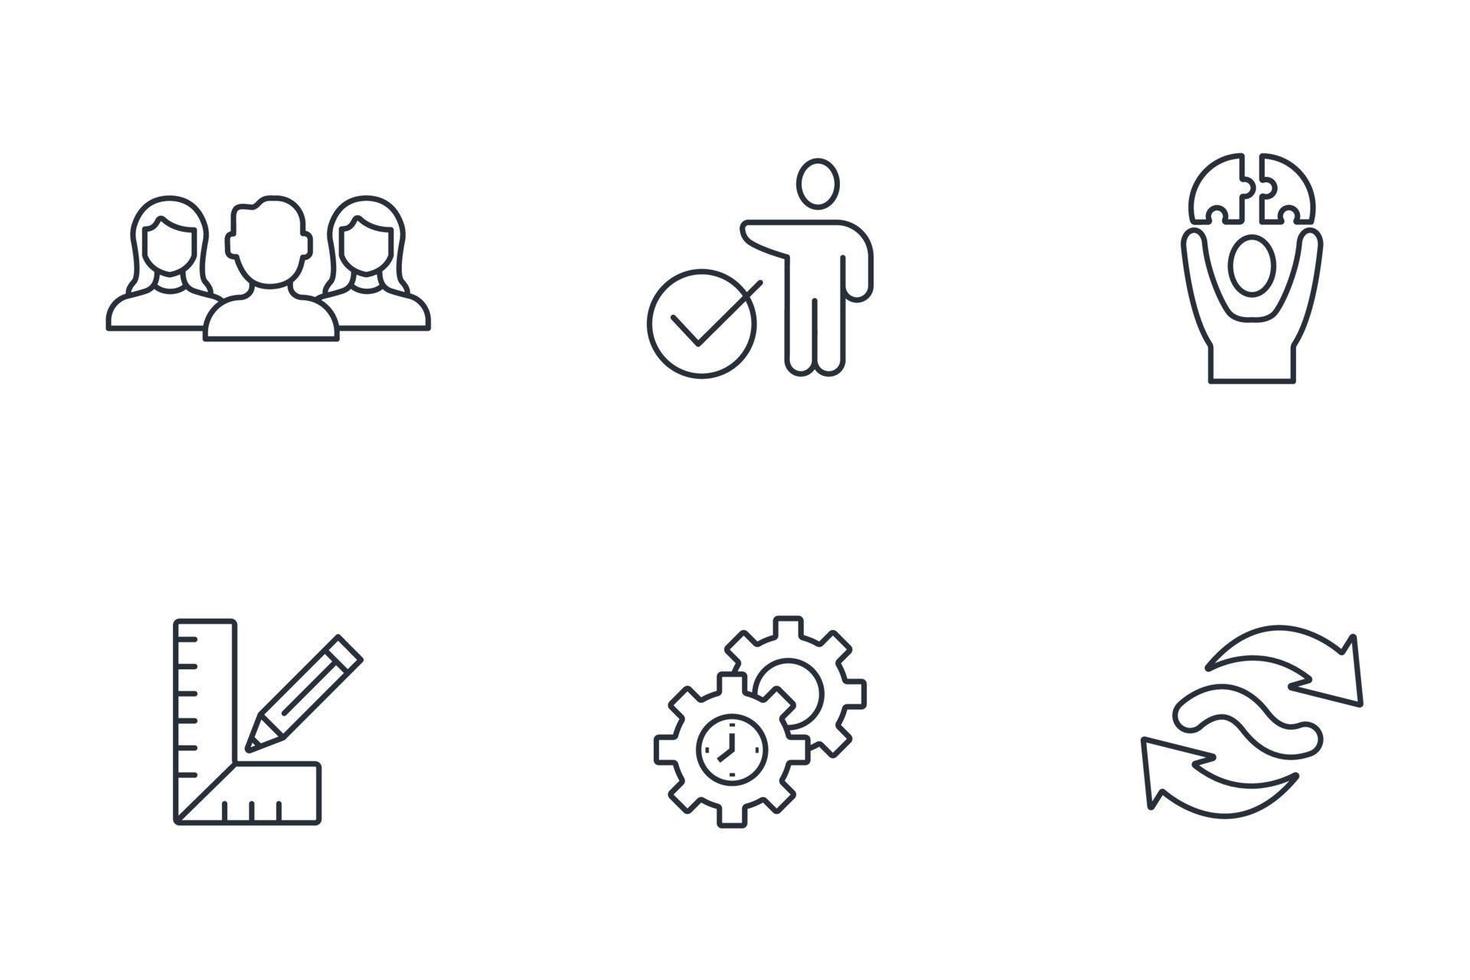 Full-time equivalent icons set . Full-time equivalent pack symbol vector elements for infographic web